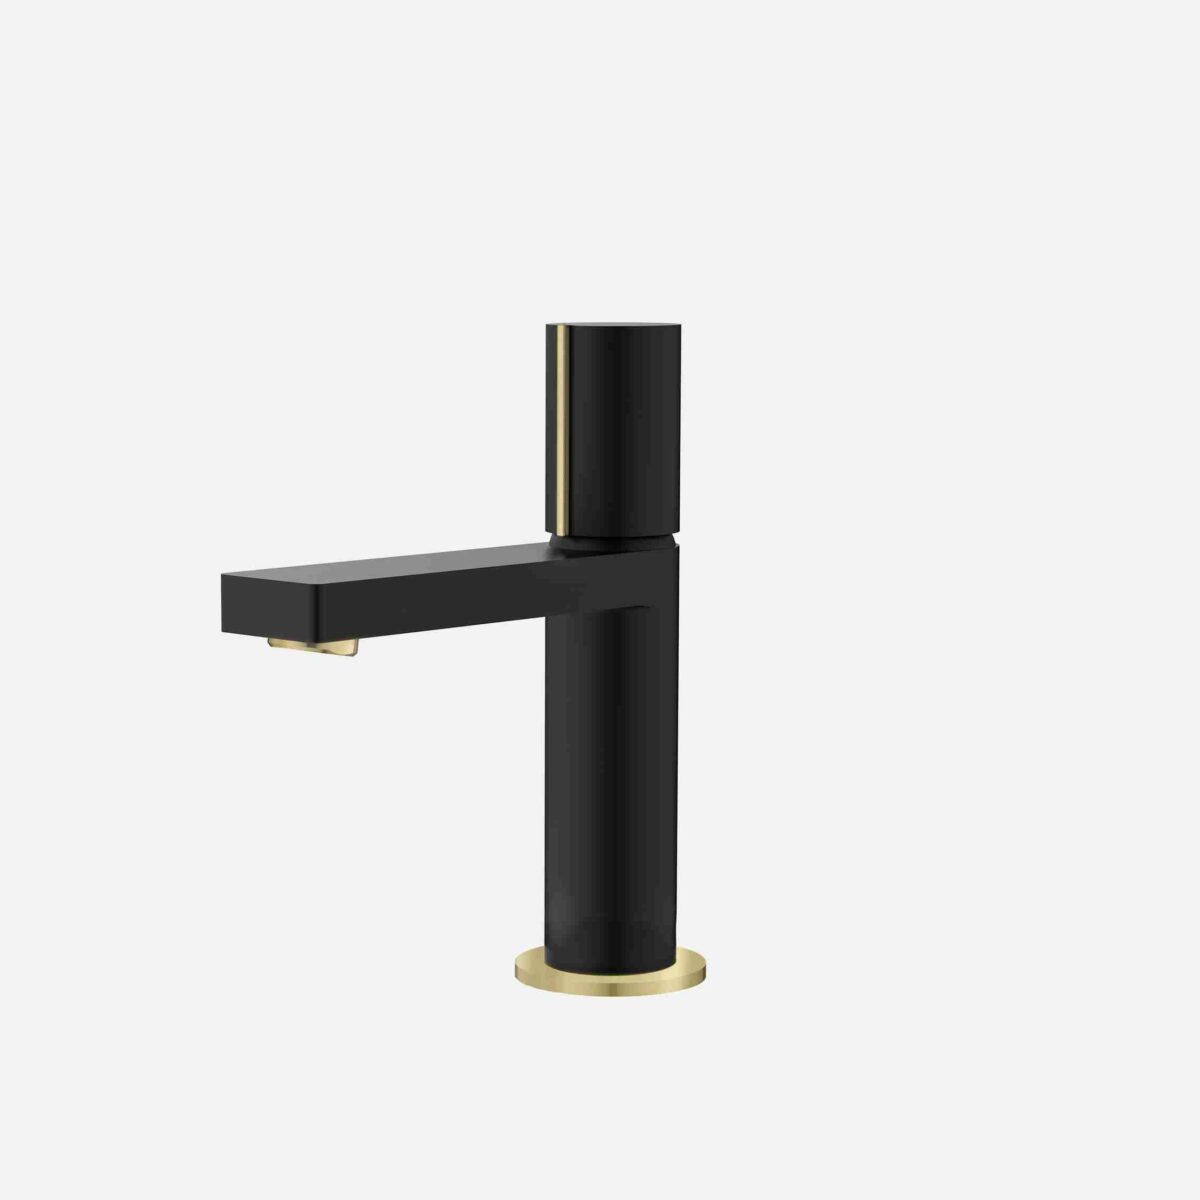 Single Handle Modern Bathroom Basin Sink Faucet in Matte Black with Gold accents Finish STYLISH